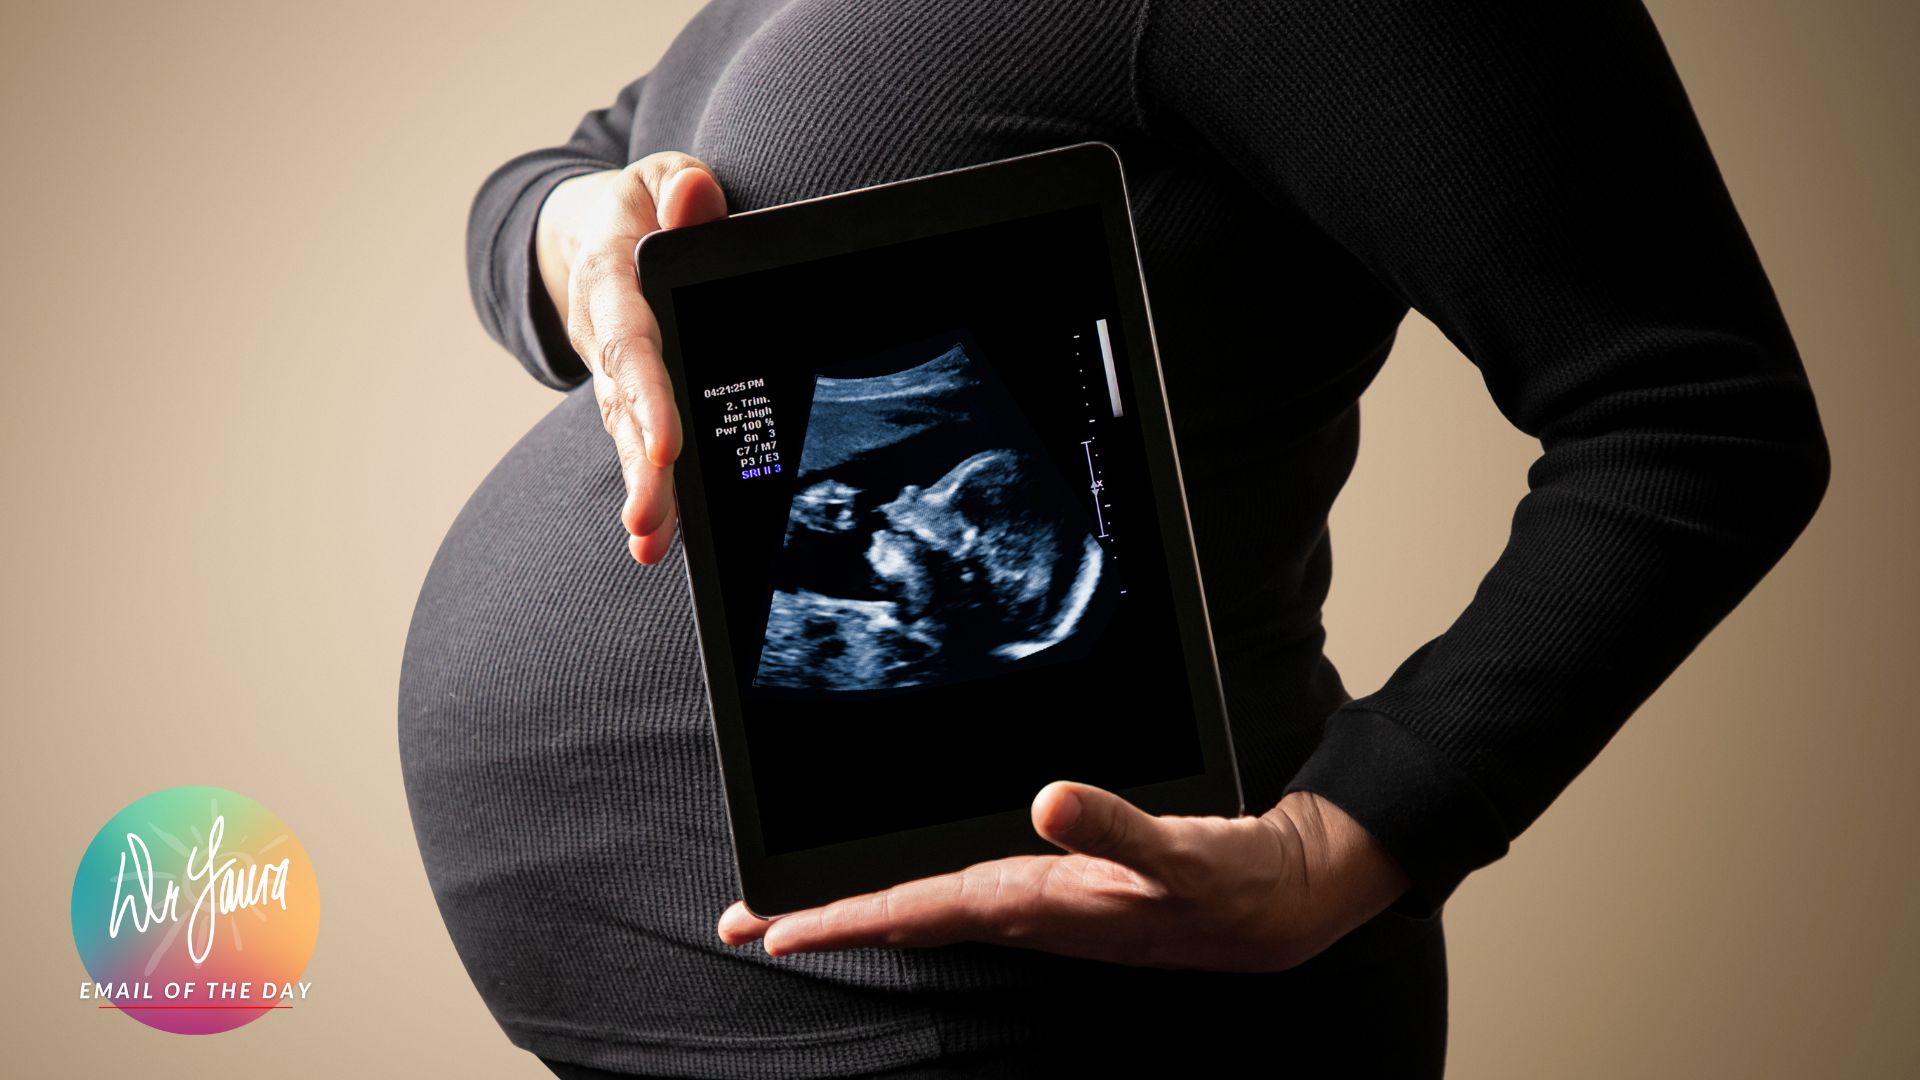 Pregnant woman in grey shirt holds tablet with uterus image in front of her belly